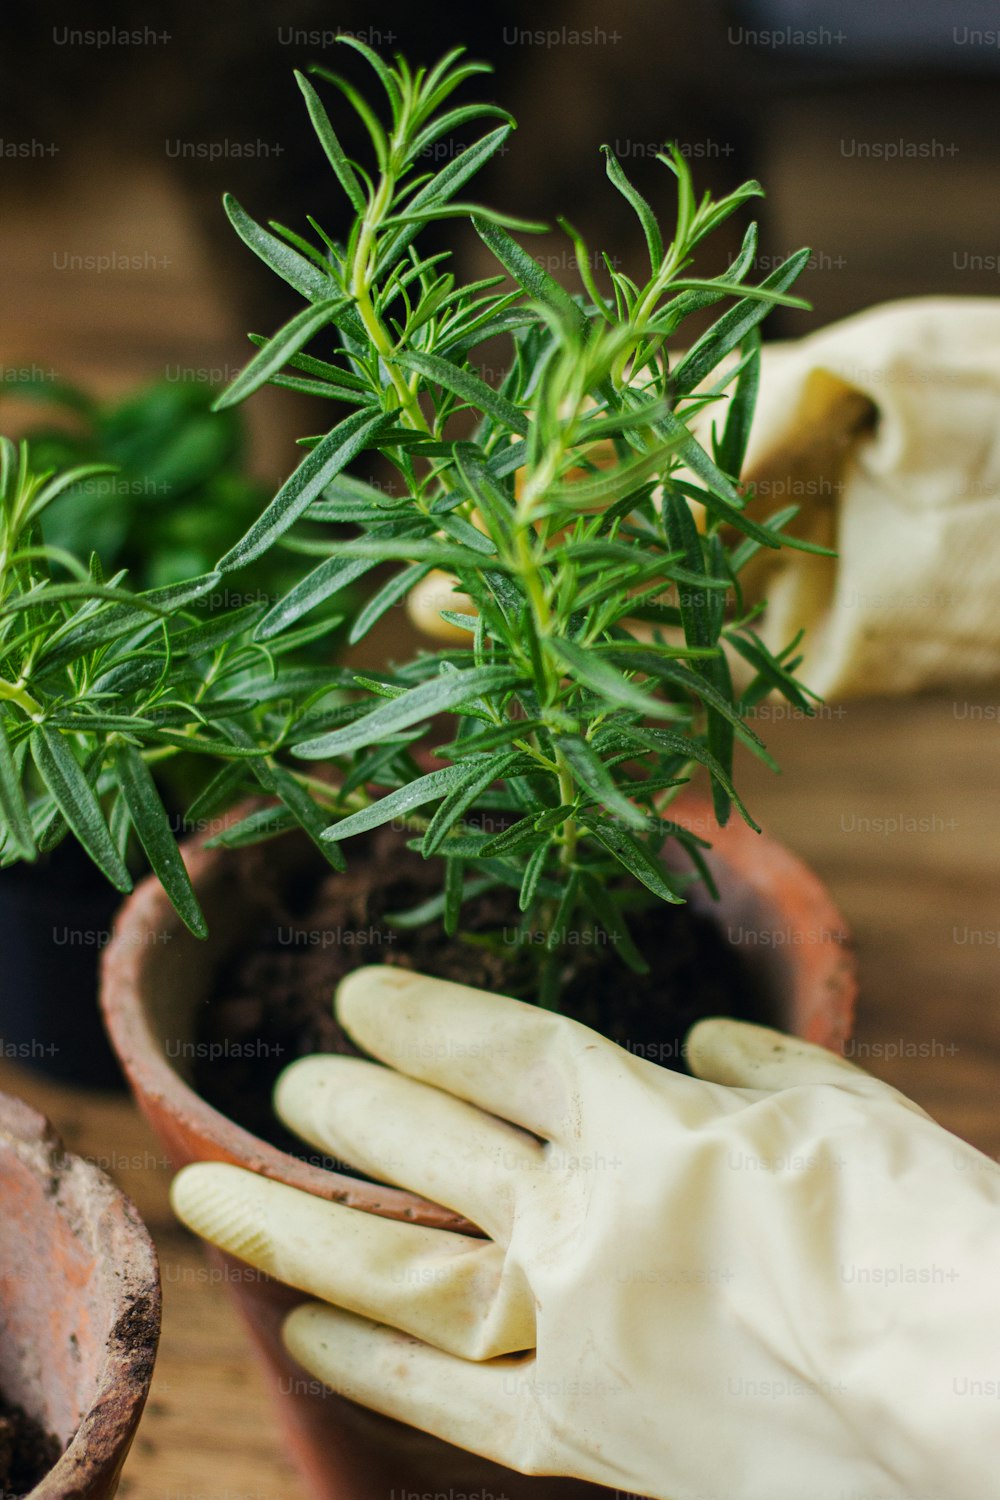 Hands in gloves potting rosemary plant in new clay pot on background of fresh green basil plant on wooden floor. Repotting and cultivating aromatic herbs at home. Horticulture